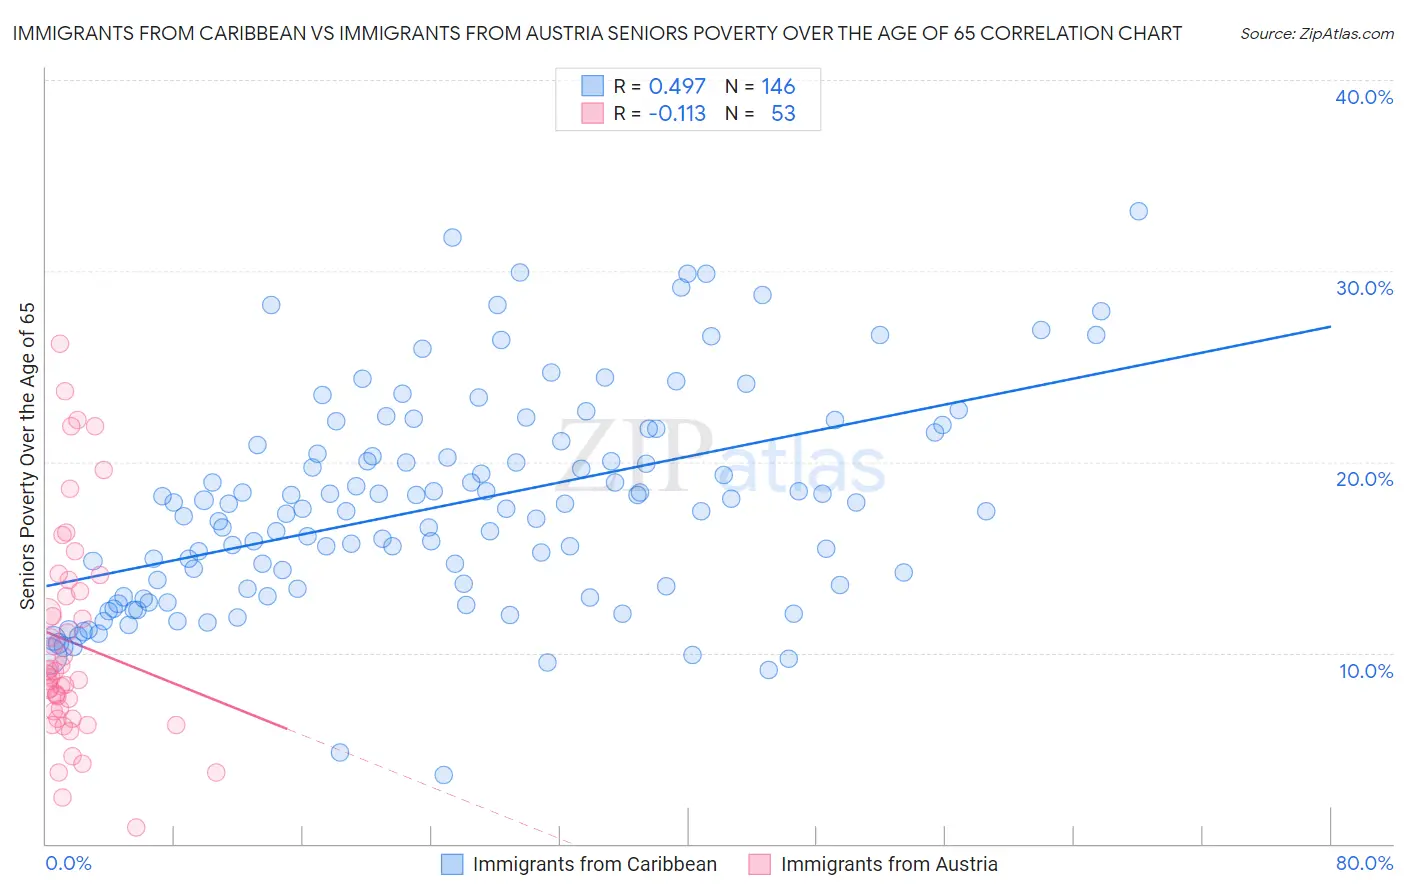 Immigrants from Caribbean vs Immigrants from Austria Seniors Poverty Over the Age of 65